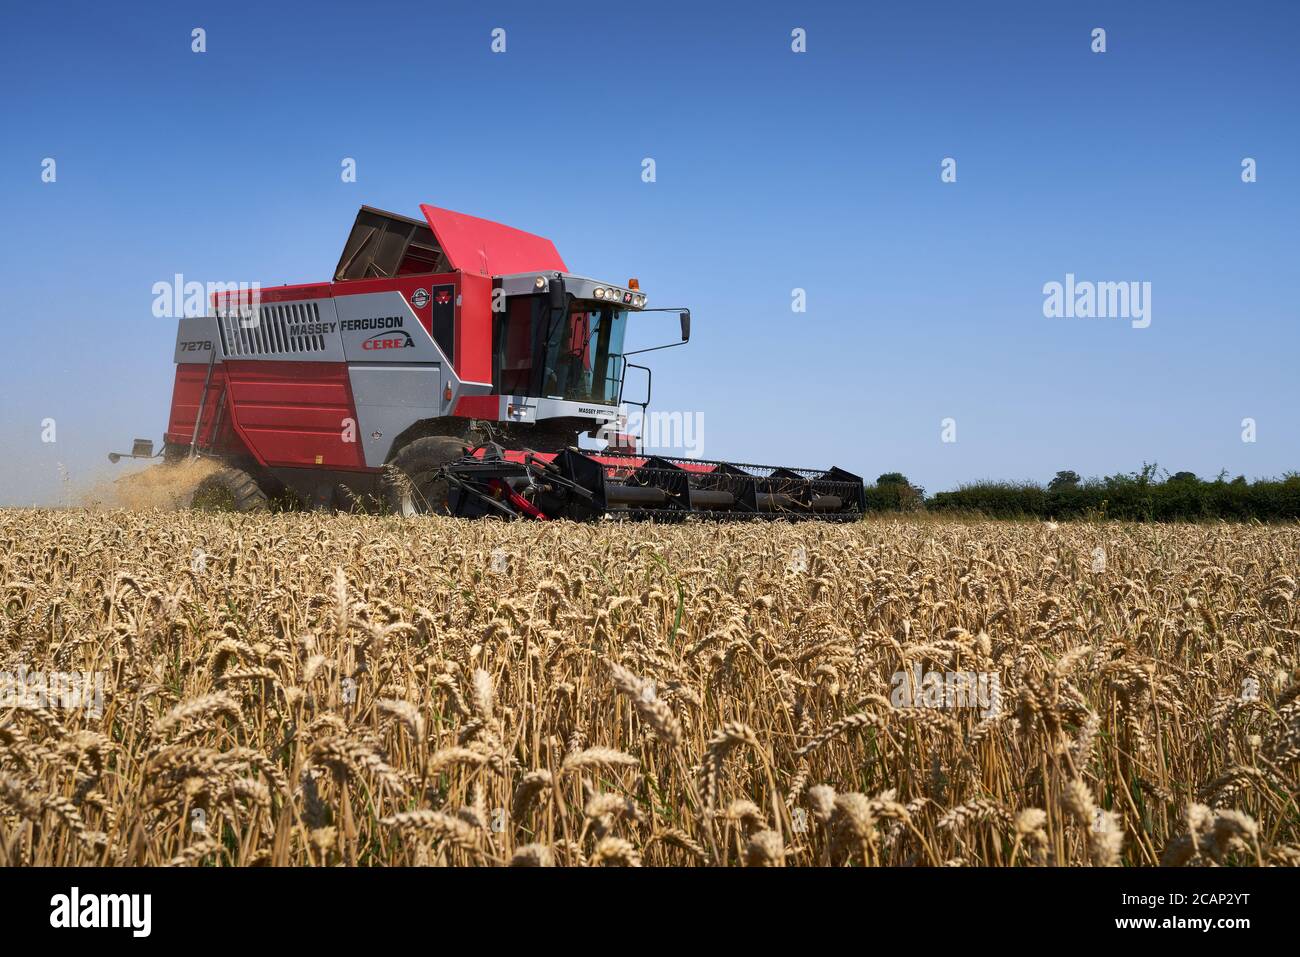 Low point of view image of a red Massey Ferguson combine harvester harvesting a Lincolnshire field of winter wheat Triticum aestivum in August Stock Photo